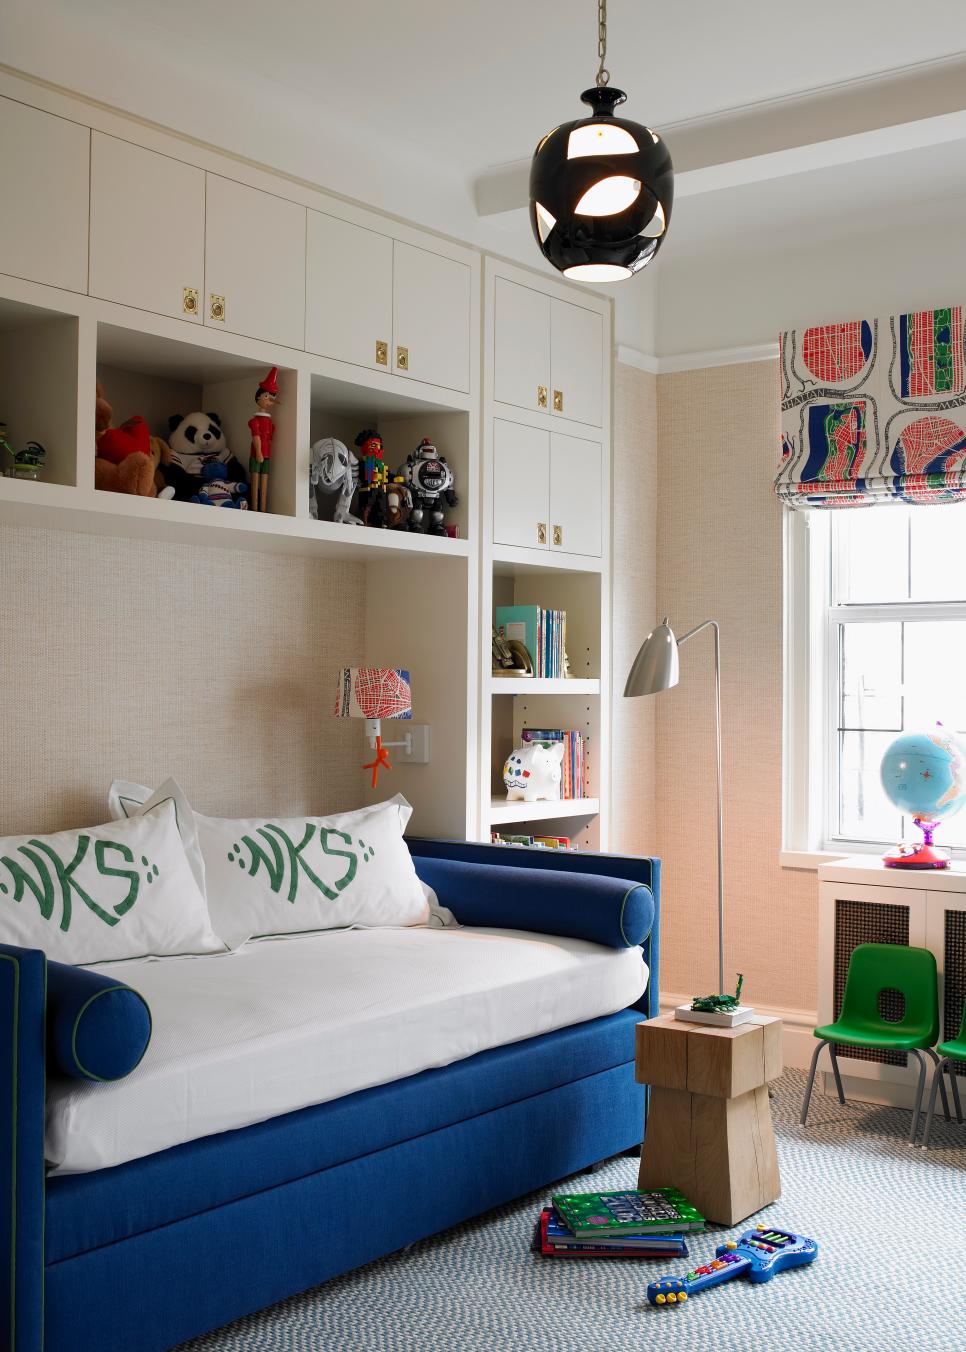 Contemporary Kids' Room With Blue Daybed and Built In Storage Shelves